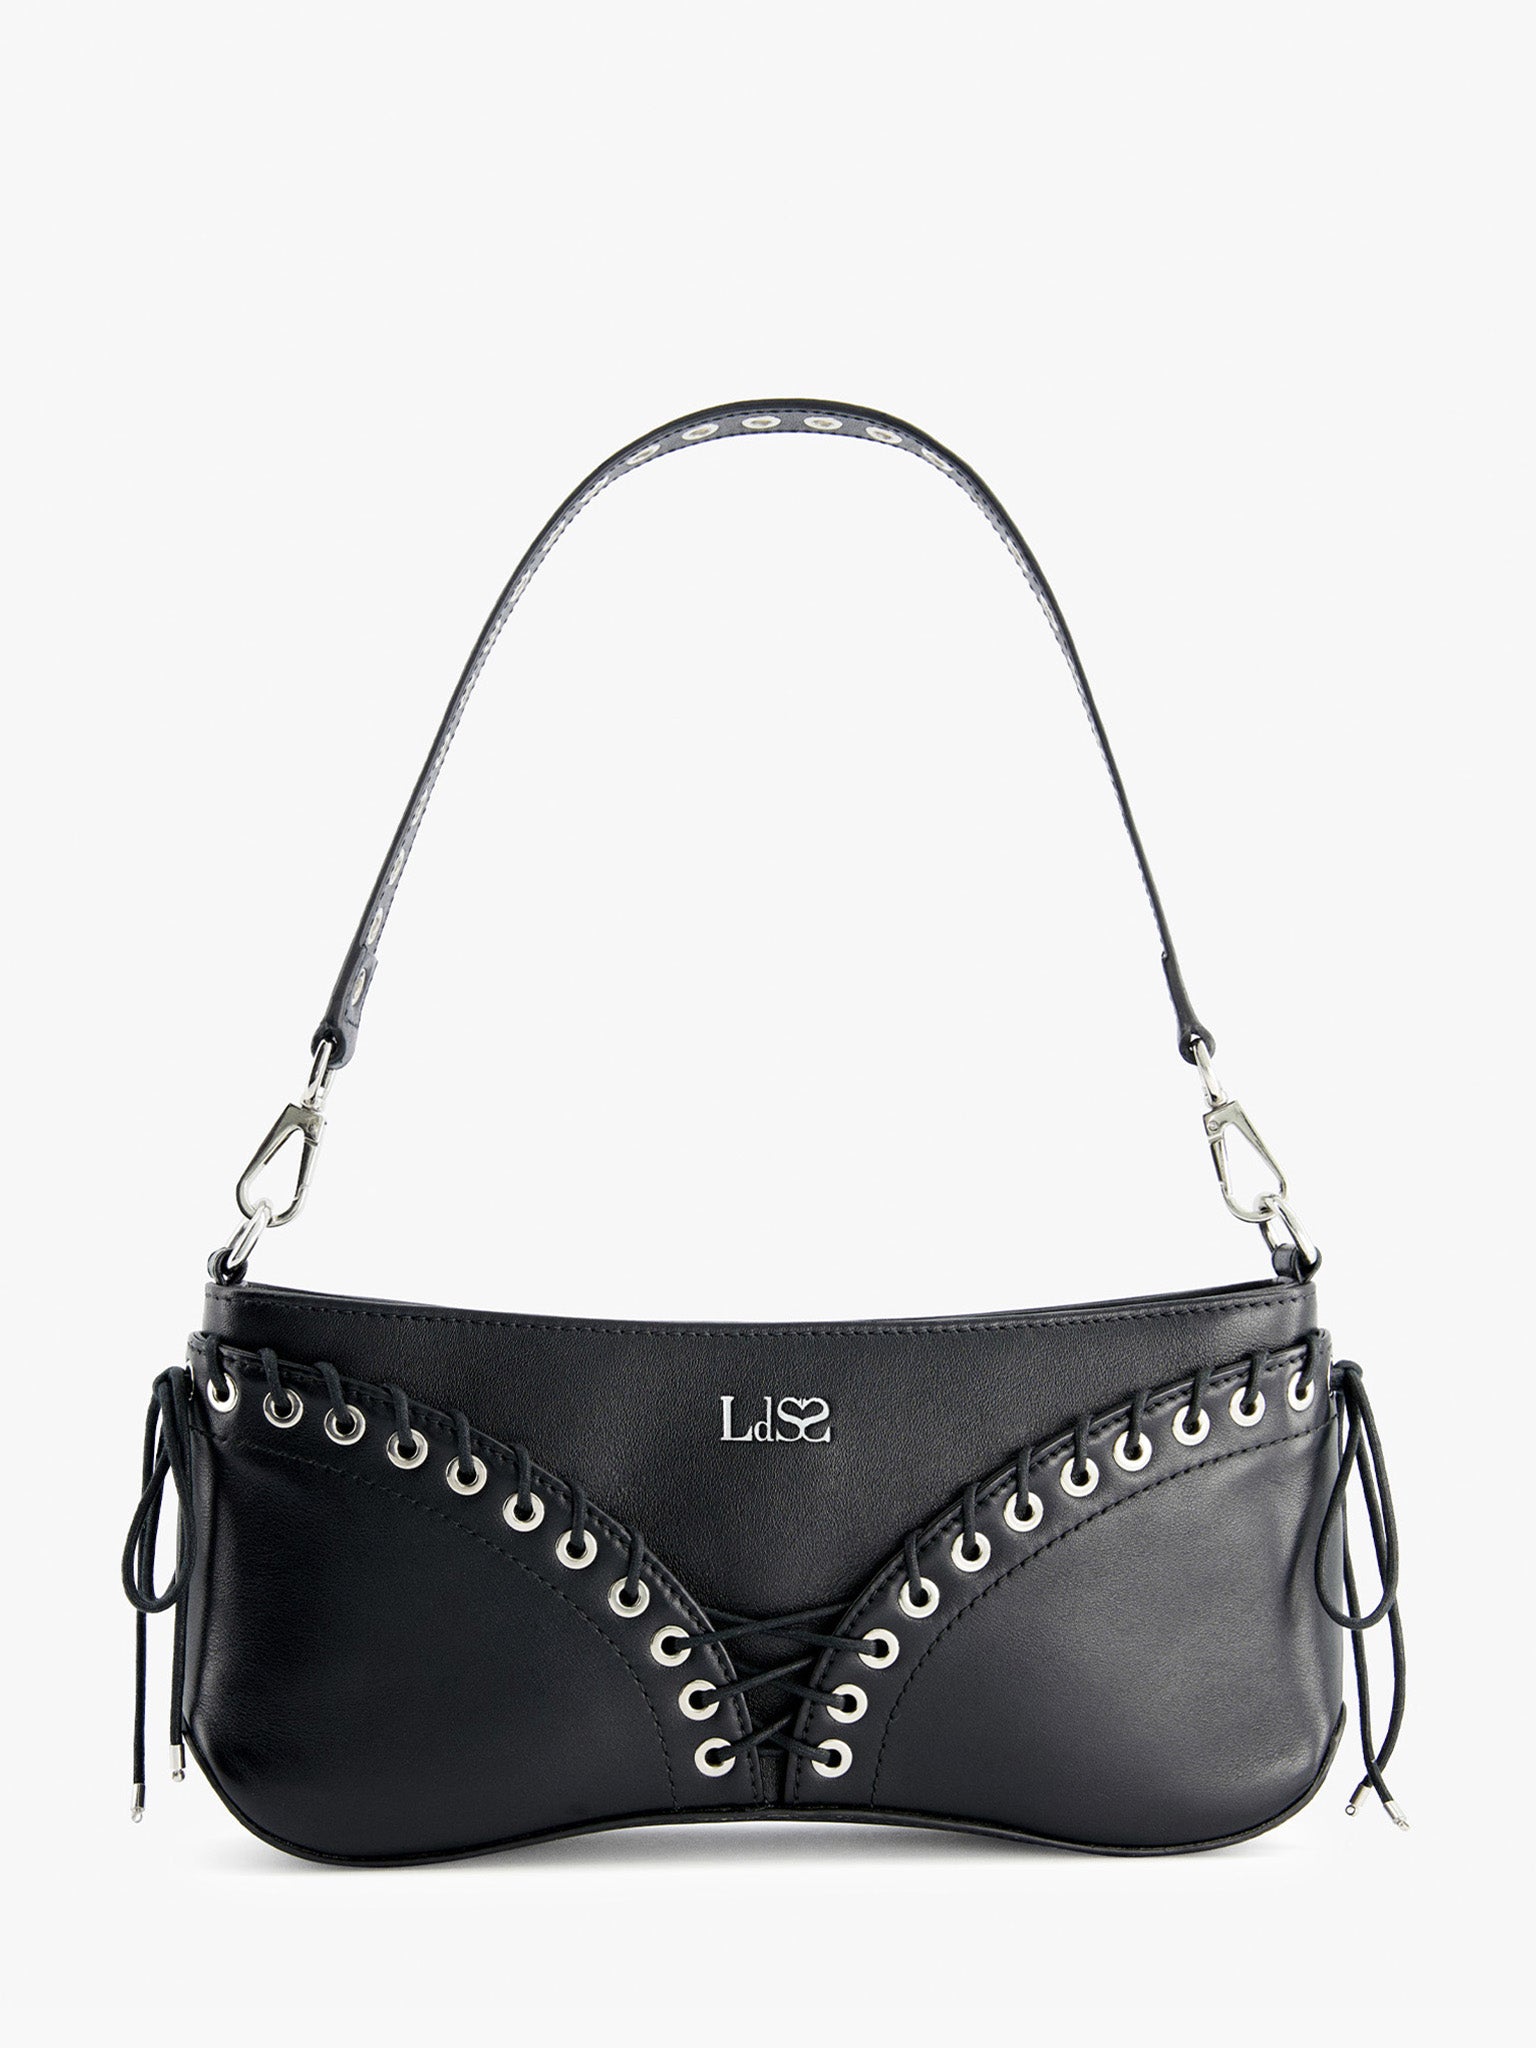 The Cleavage Bag in Black Leather